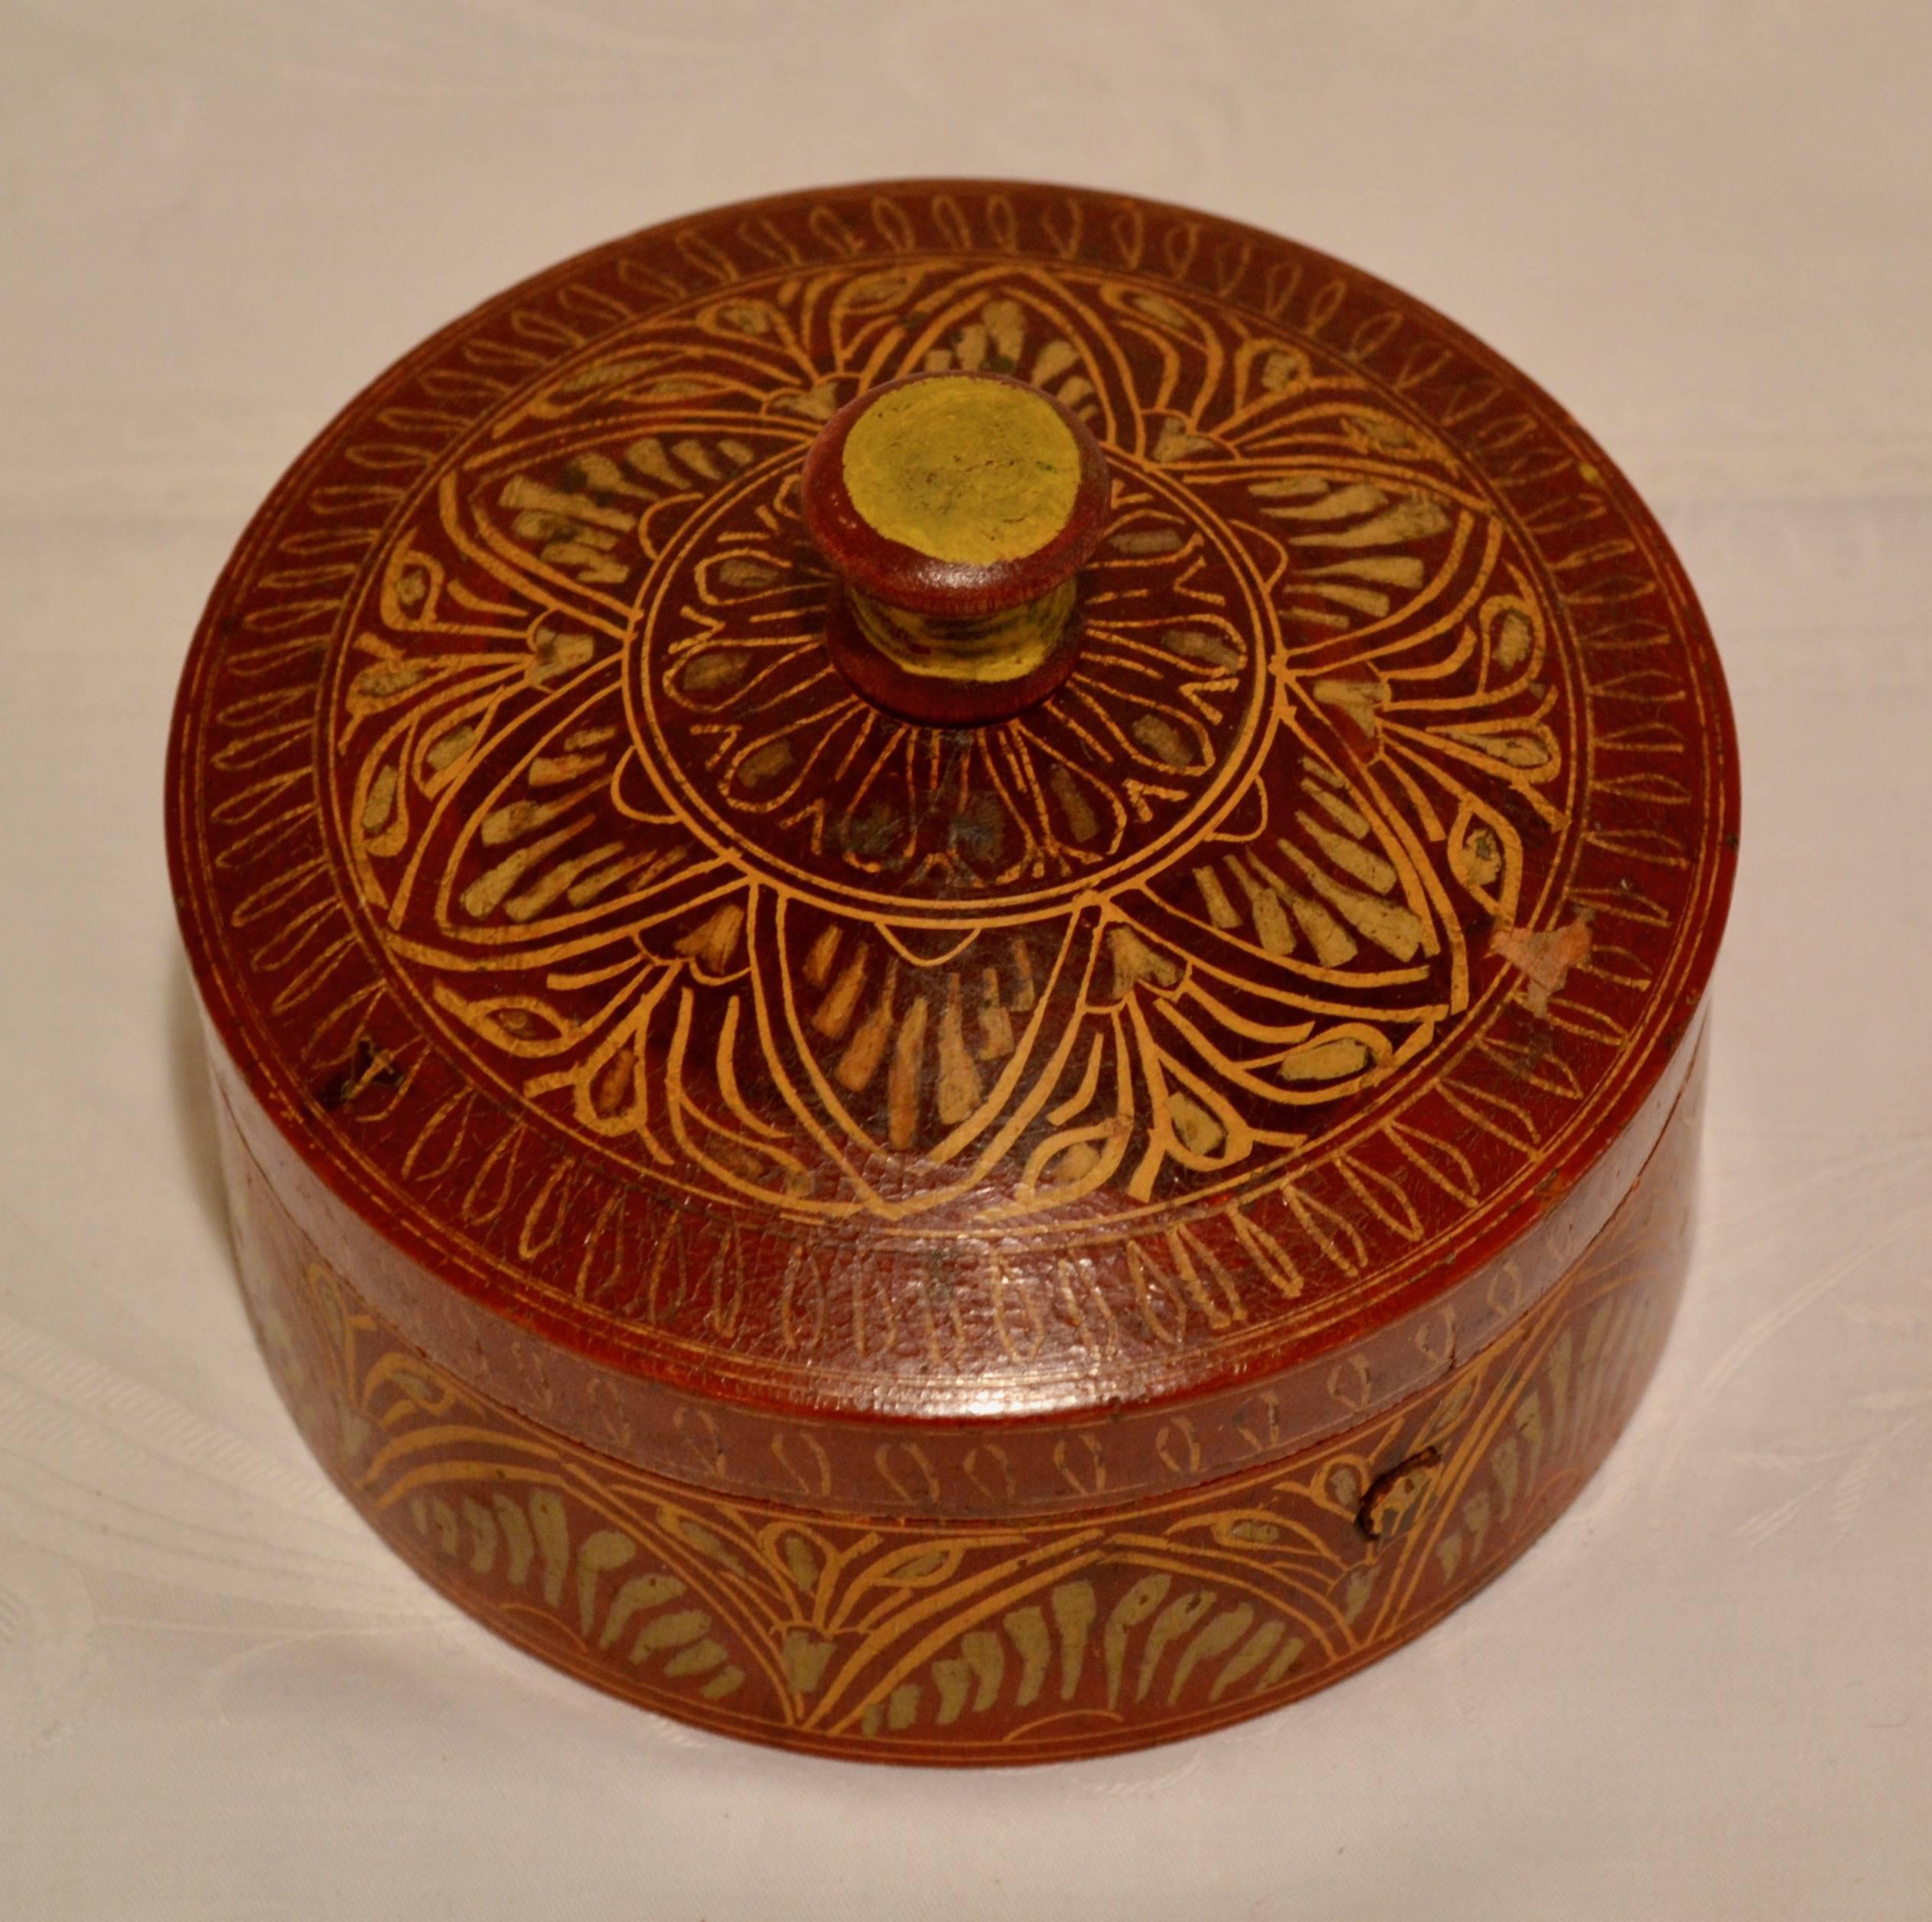 This is a vintage hand-turned, hand-painted tribal wooden spice box from Afghanistan with a stylized floral and leaf design in red, gold, and yellow. It is in superb condition with a well-fitting lid and only a few chips to the paint to testify to